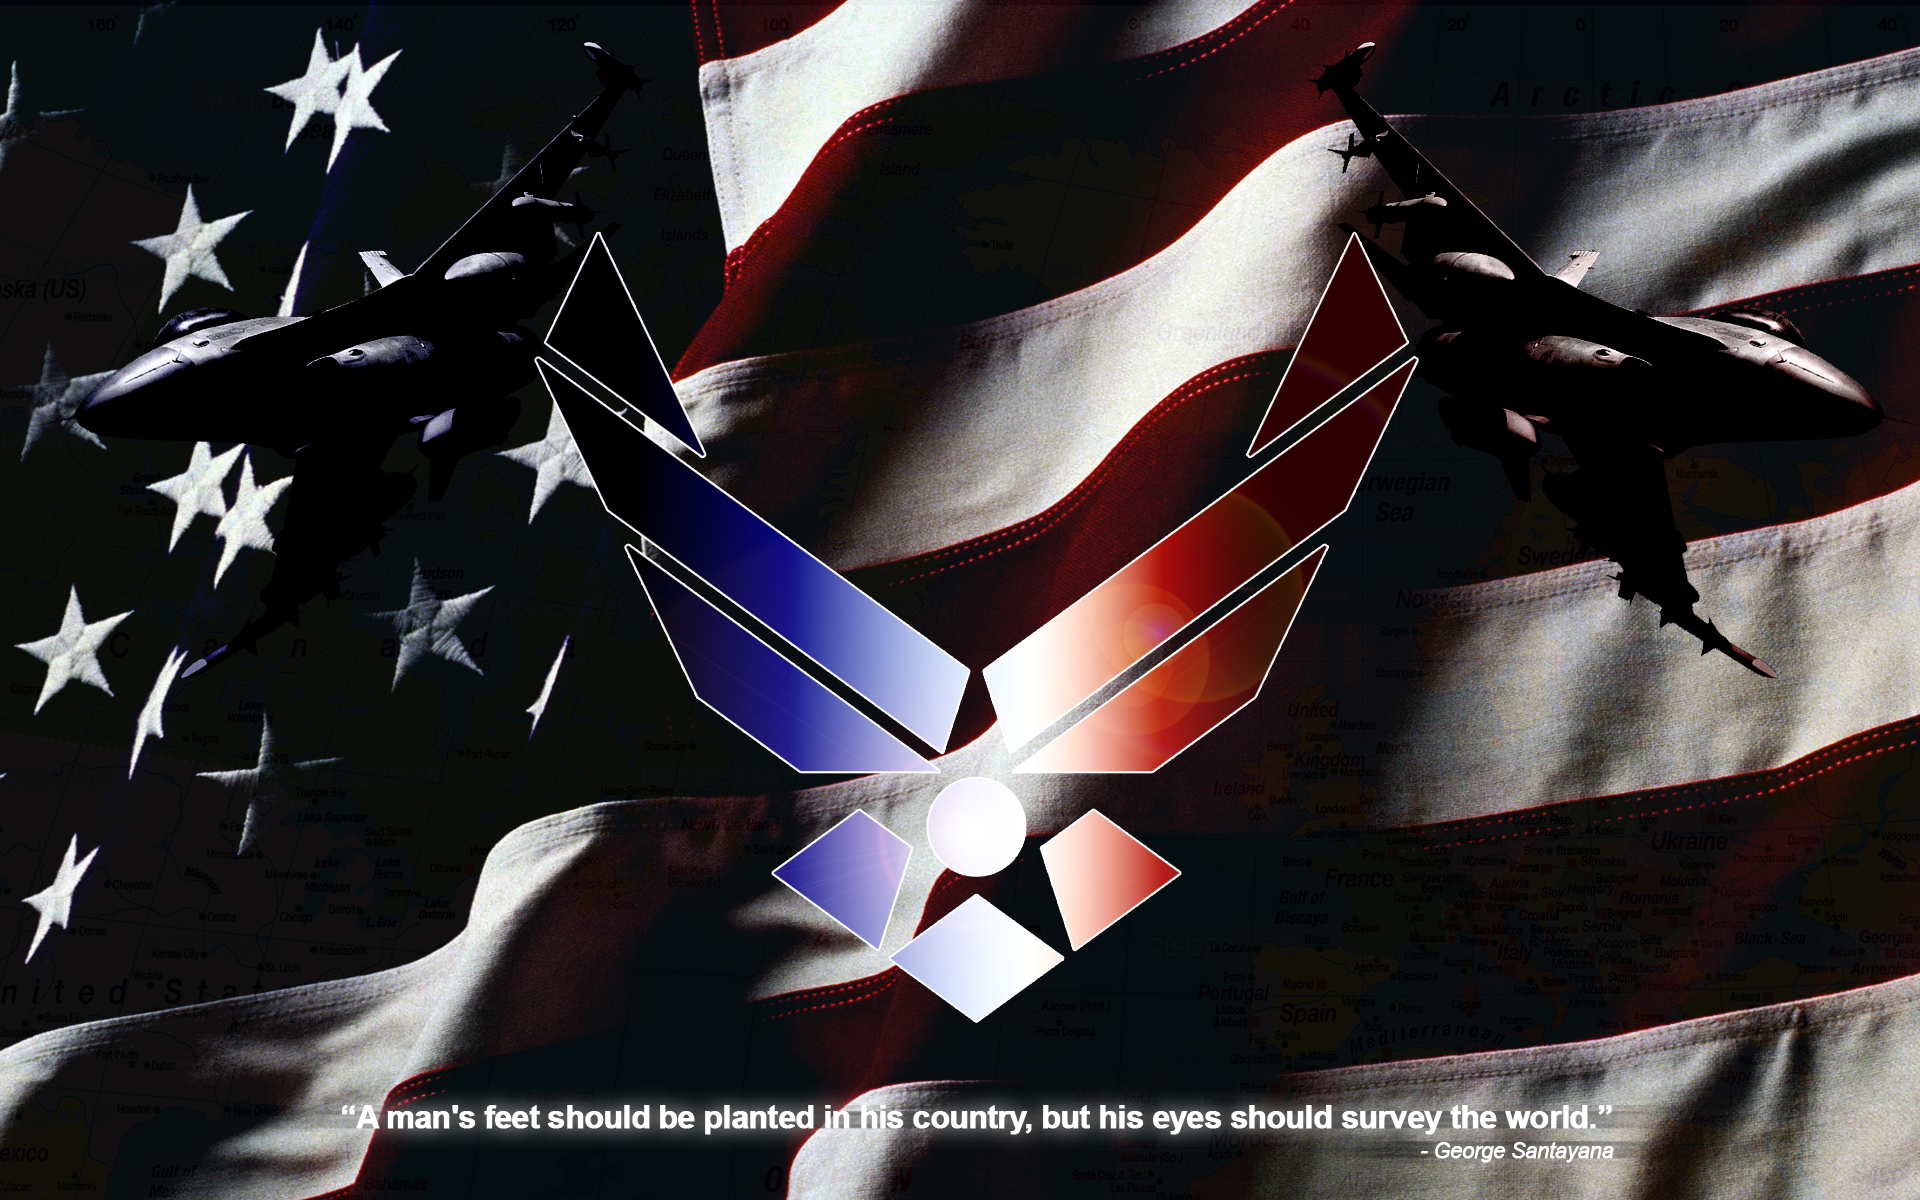 Us Air Force images Air Force wallpaper photos 20039026